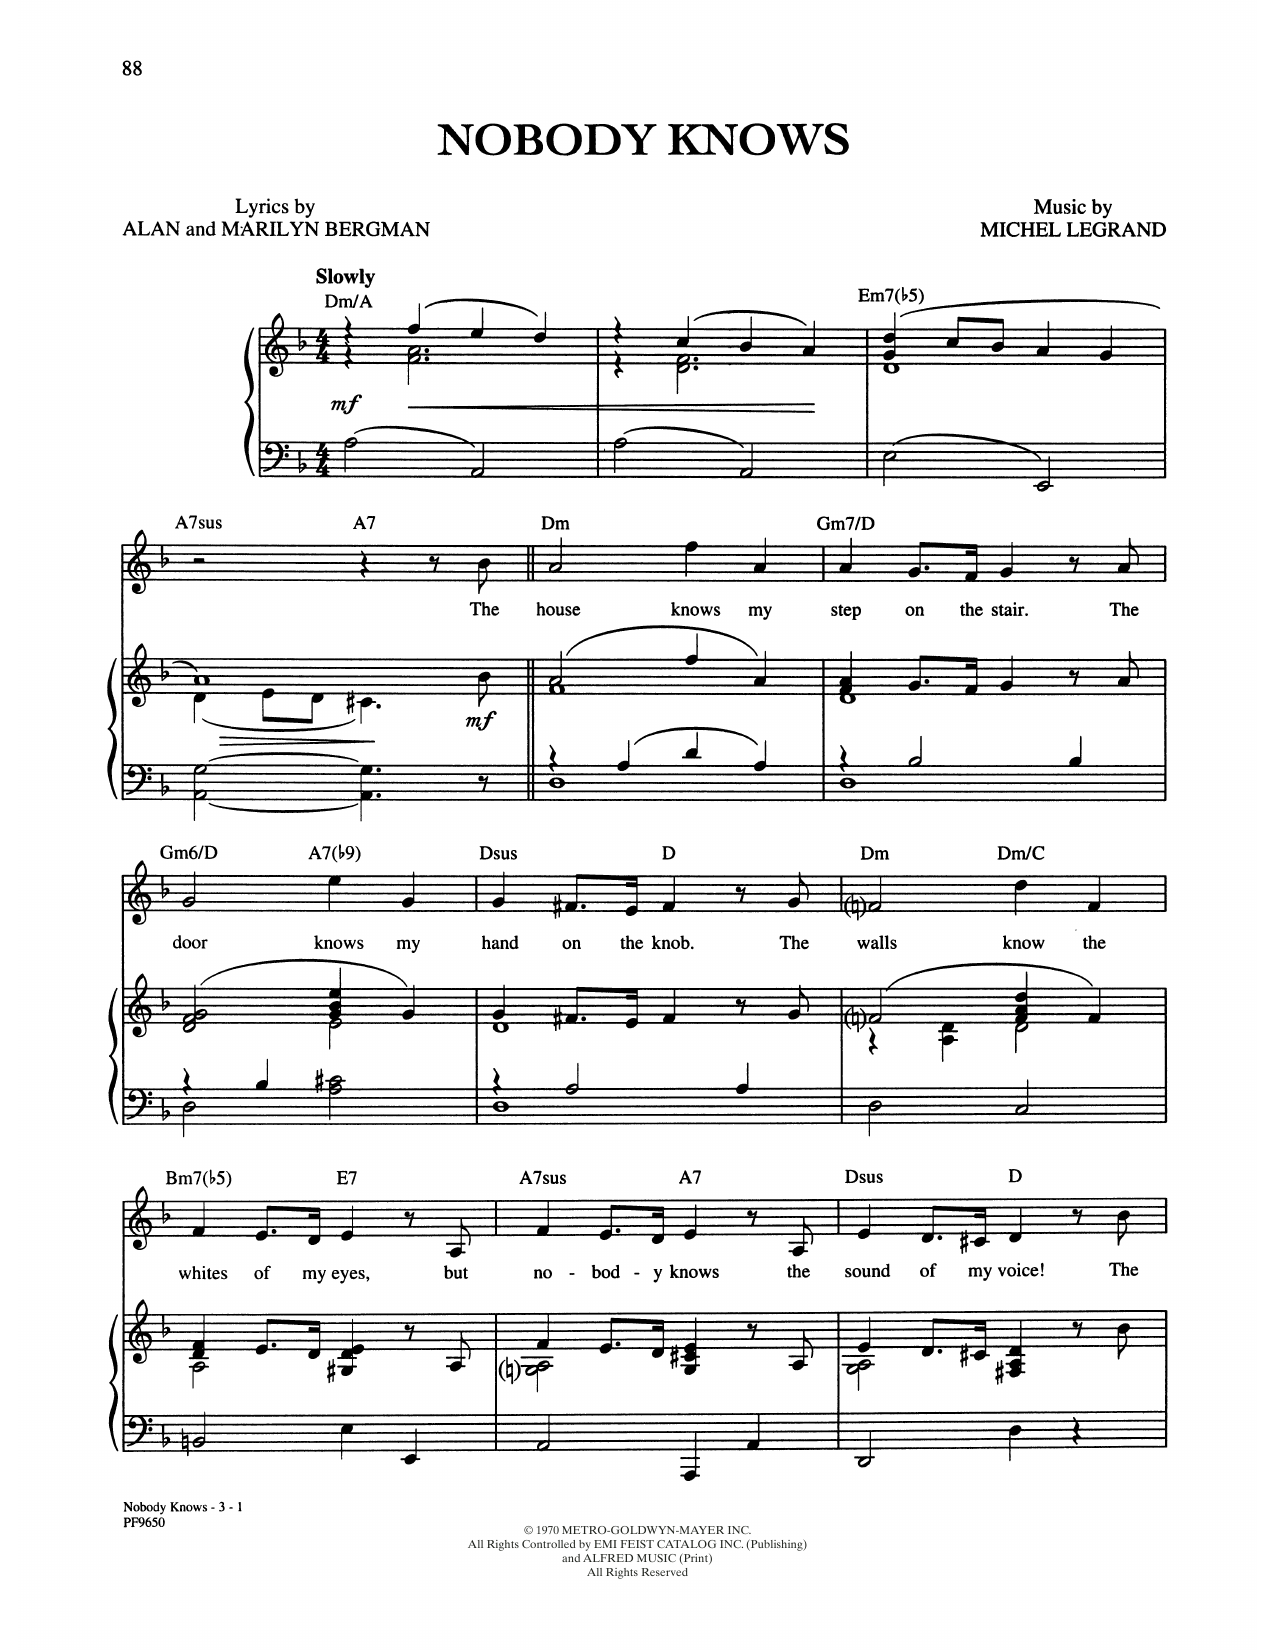 Download Alan and Marilyn Bergman and Michel Nobody Knows Sheet Music